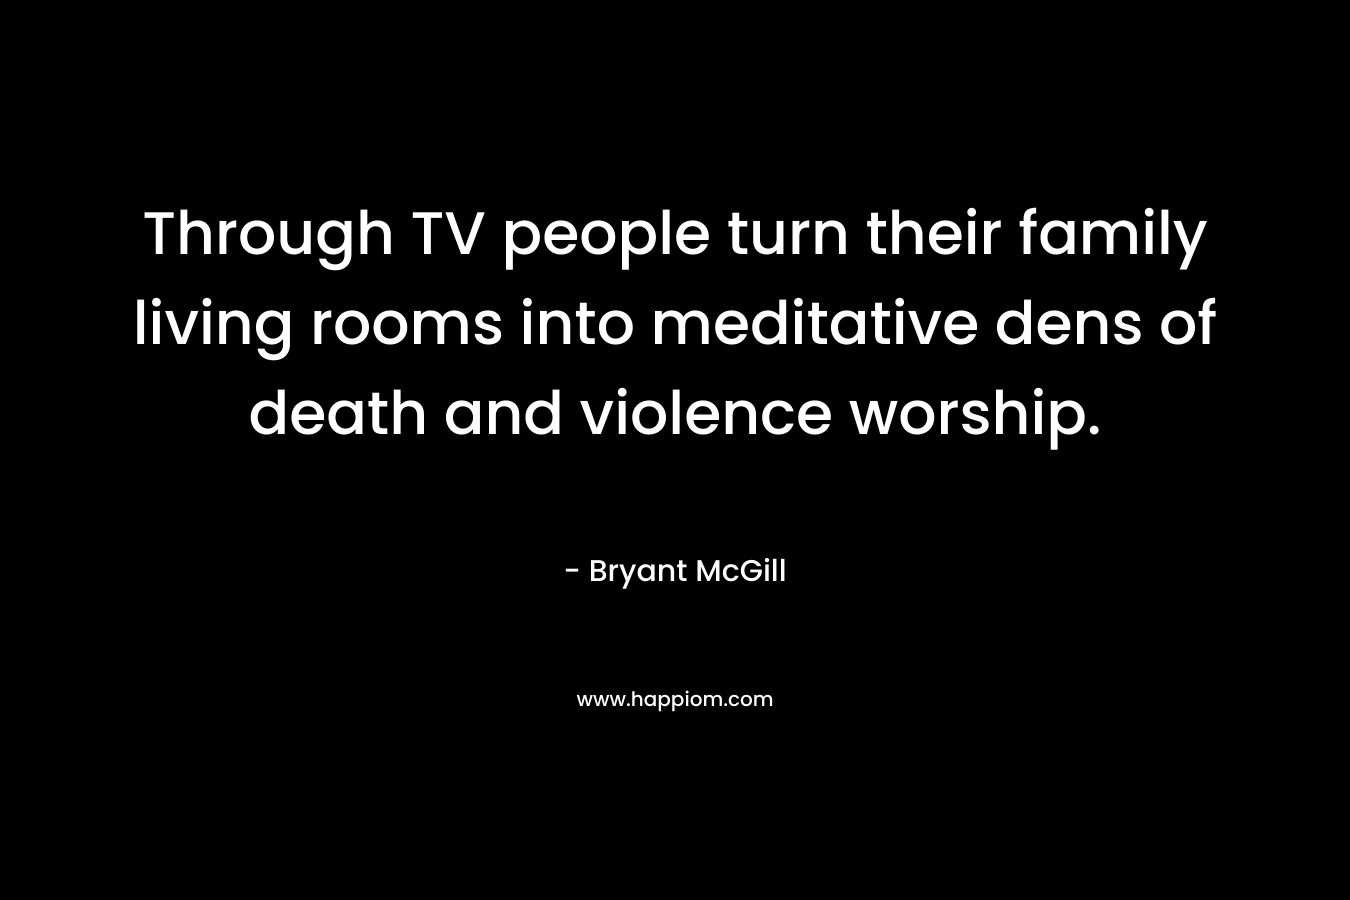 Through TV people turn their family living rooms into meditative dens of death and violence worship. – Bryant McGill